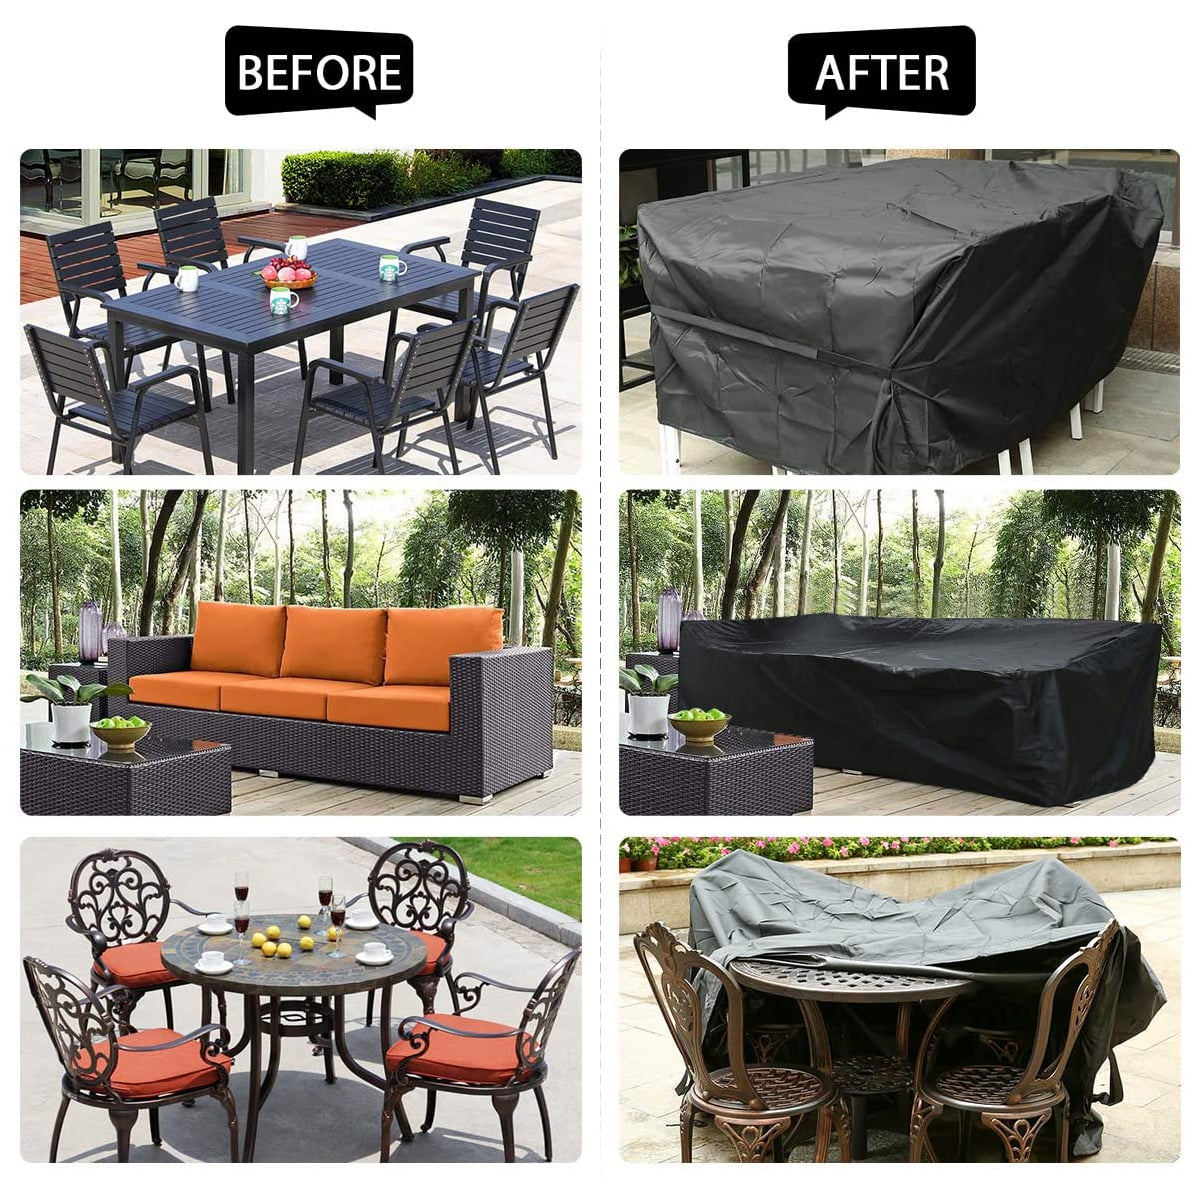 king do way Outdoor Patio Waterproof Furniture Set Covers Protective Covers for Garden Loveseat Black 137.8 X102.4 X 35.4 